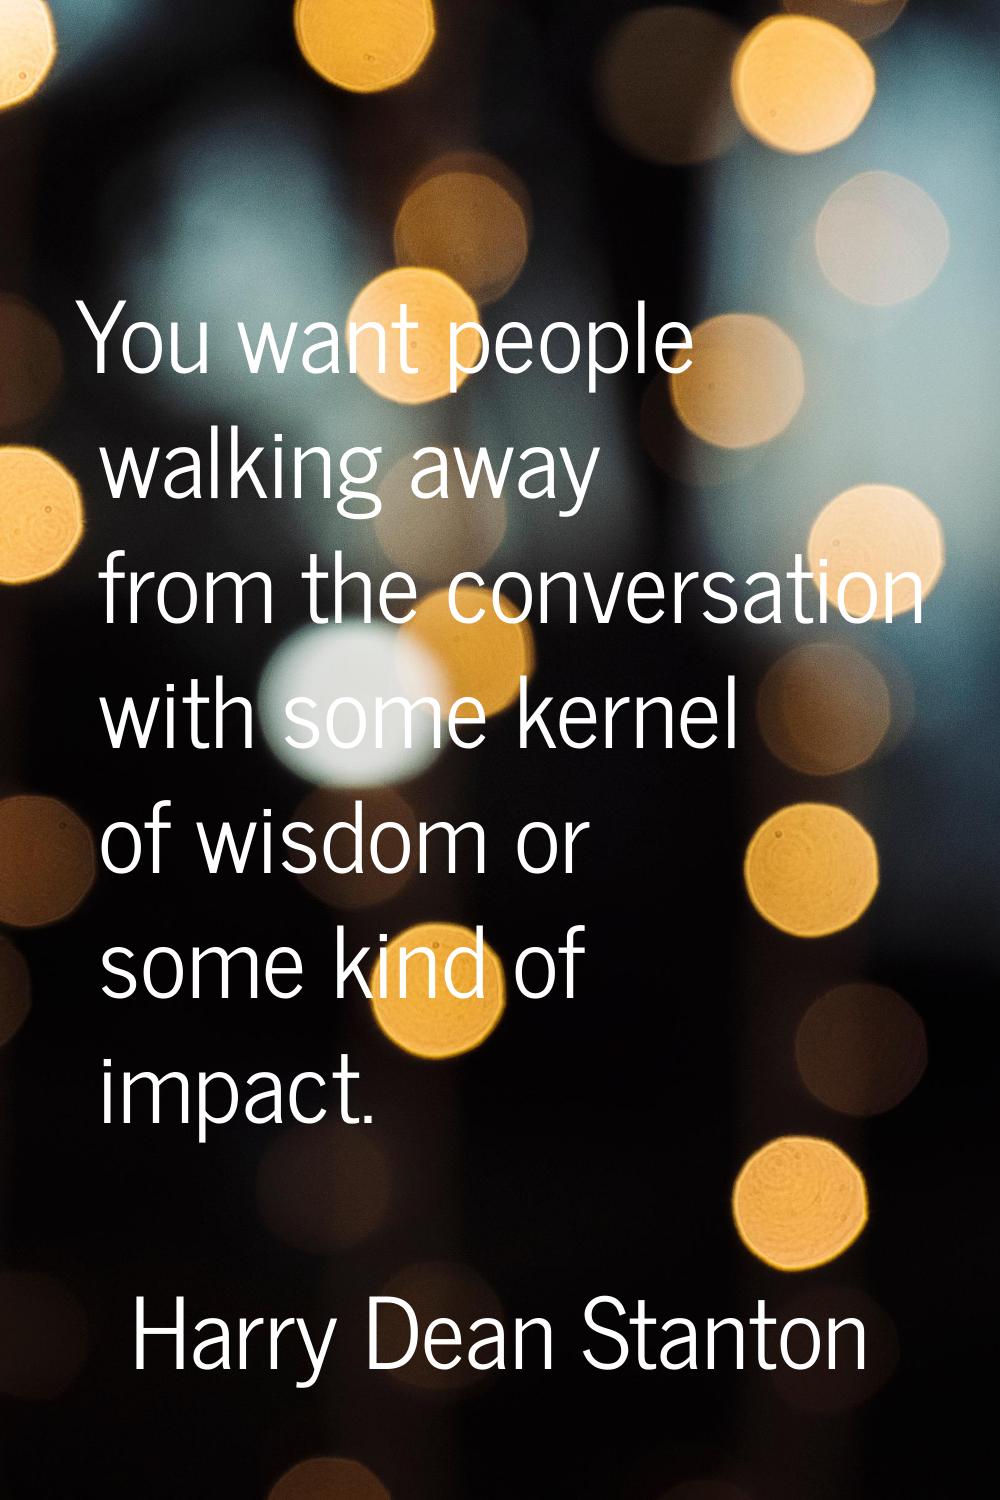 You want people walking away from the conversation with some kernel of wisdom or some kind of impac